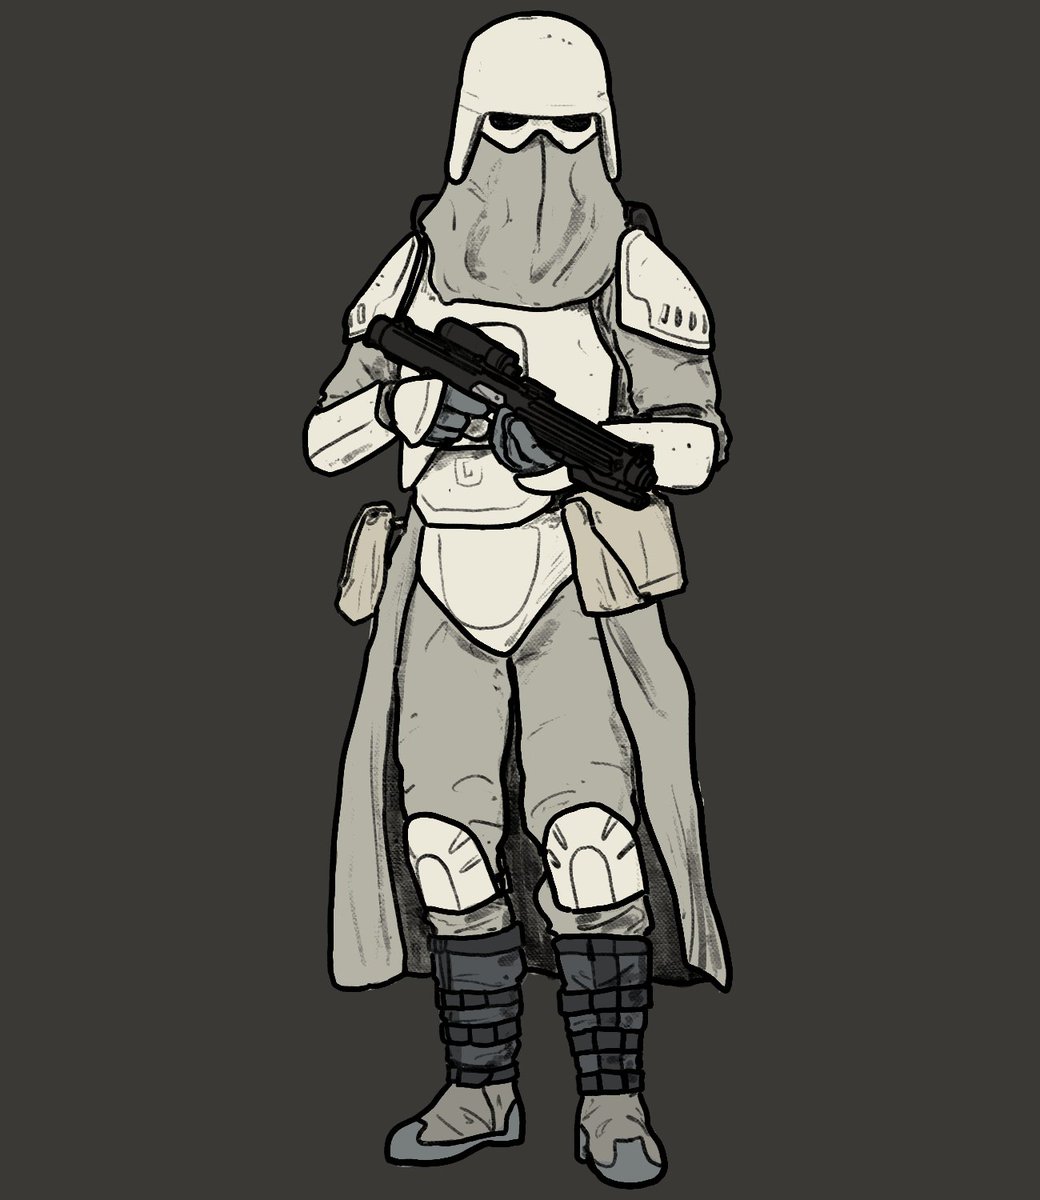 Where it all began. Watching The Empire Strikes Back as a kid in the early 2000s made me want to draw and create my own universes and characters. The Snowtrooper is my favorite design (maybe the Deathtrooper could tie it). 
#StarWars #art